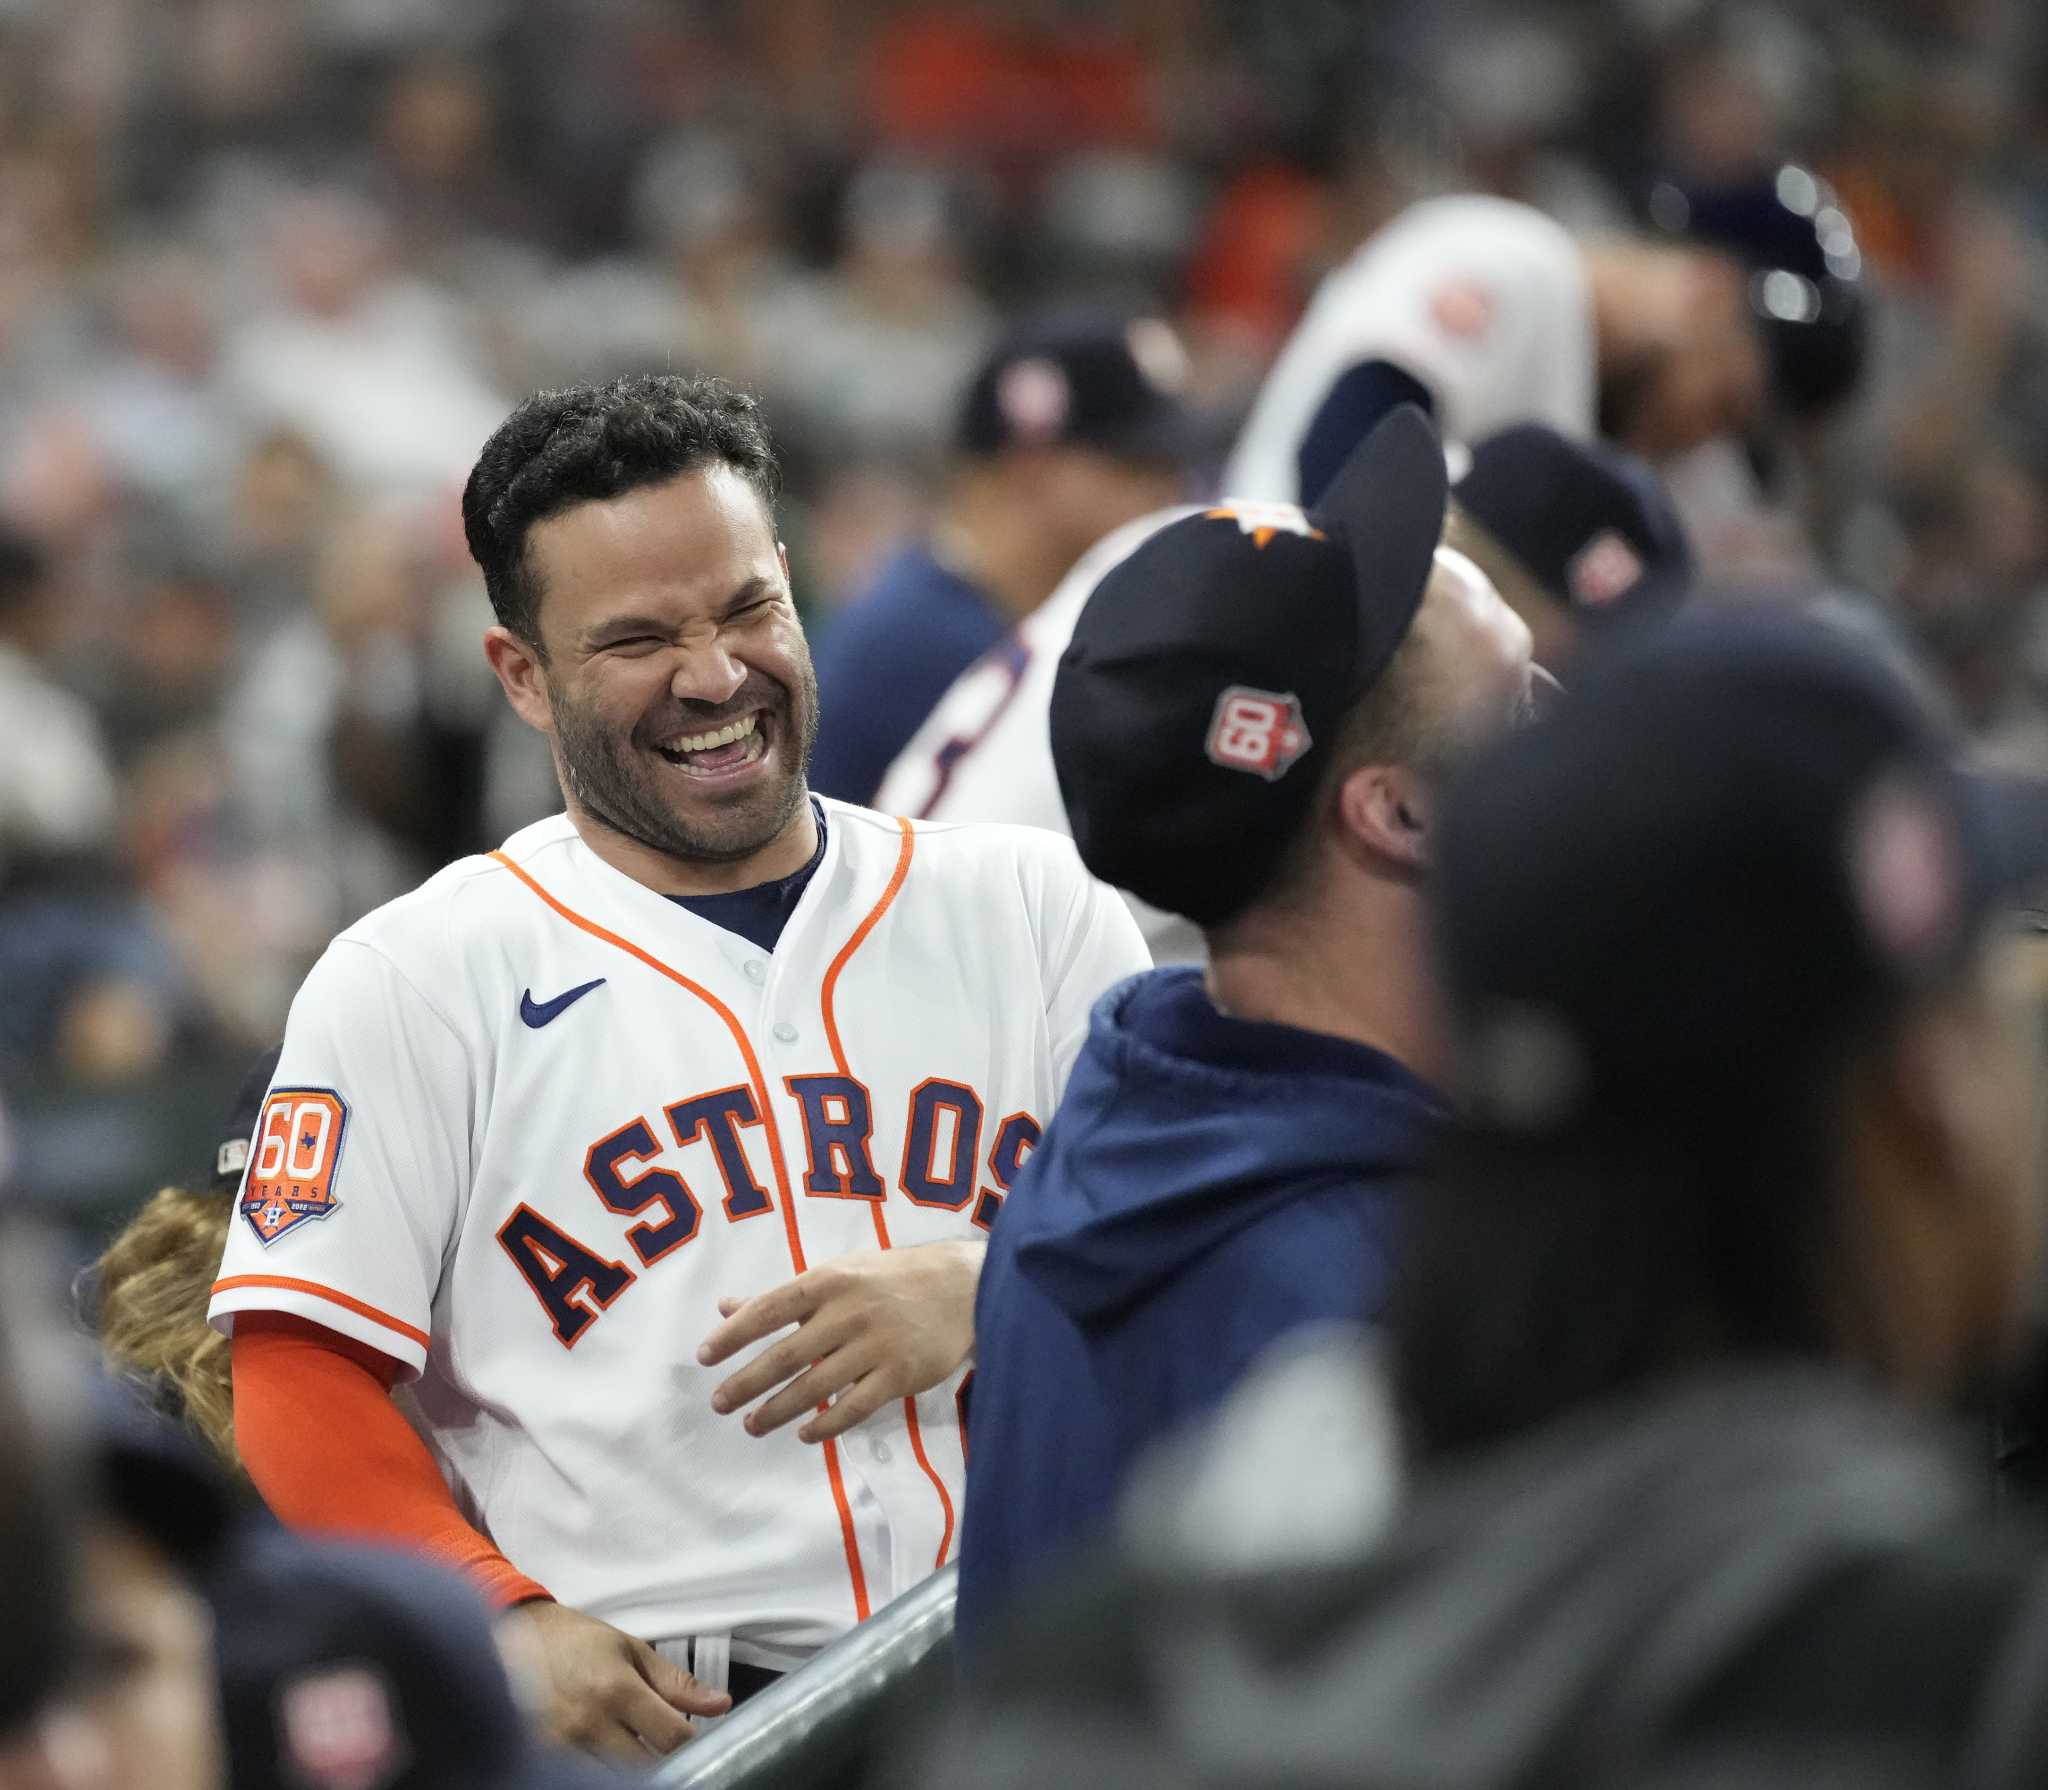 EVERY TIME THE ASTROS BANGED ON A TRASH CAN WHEN ALTUVE WAS